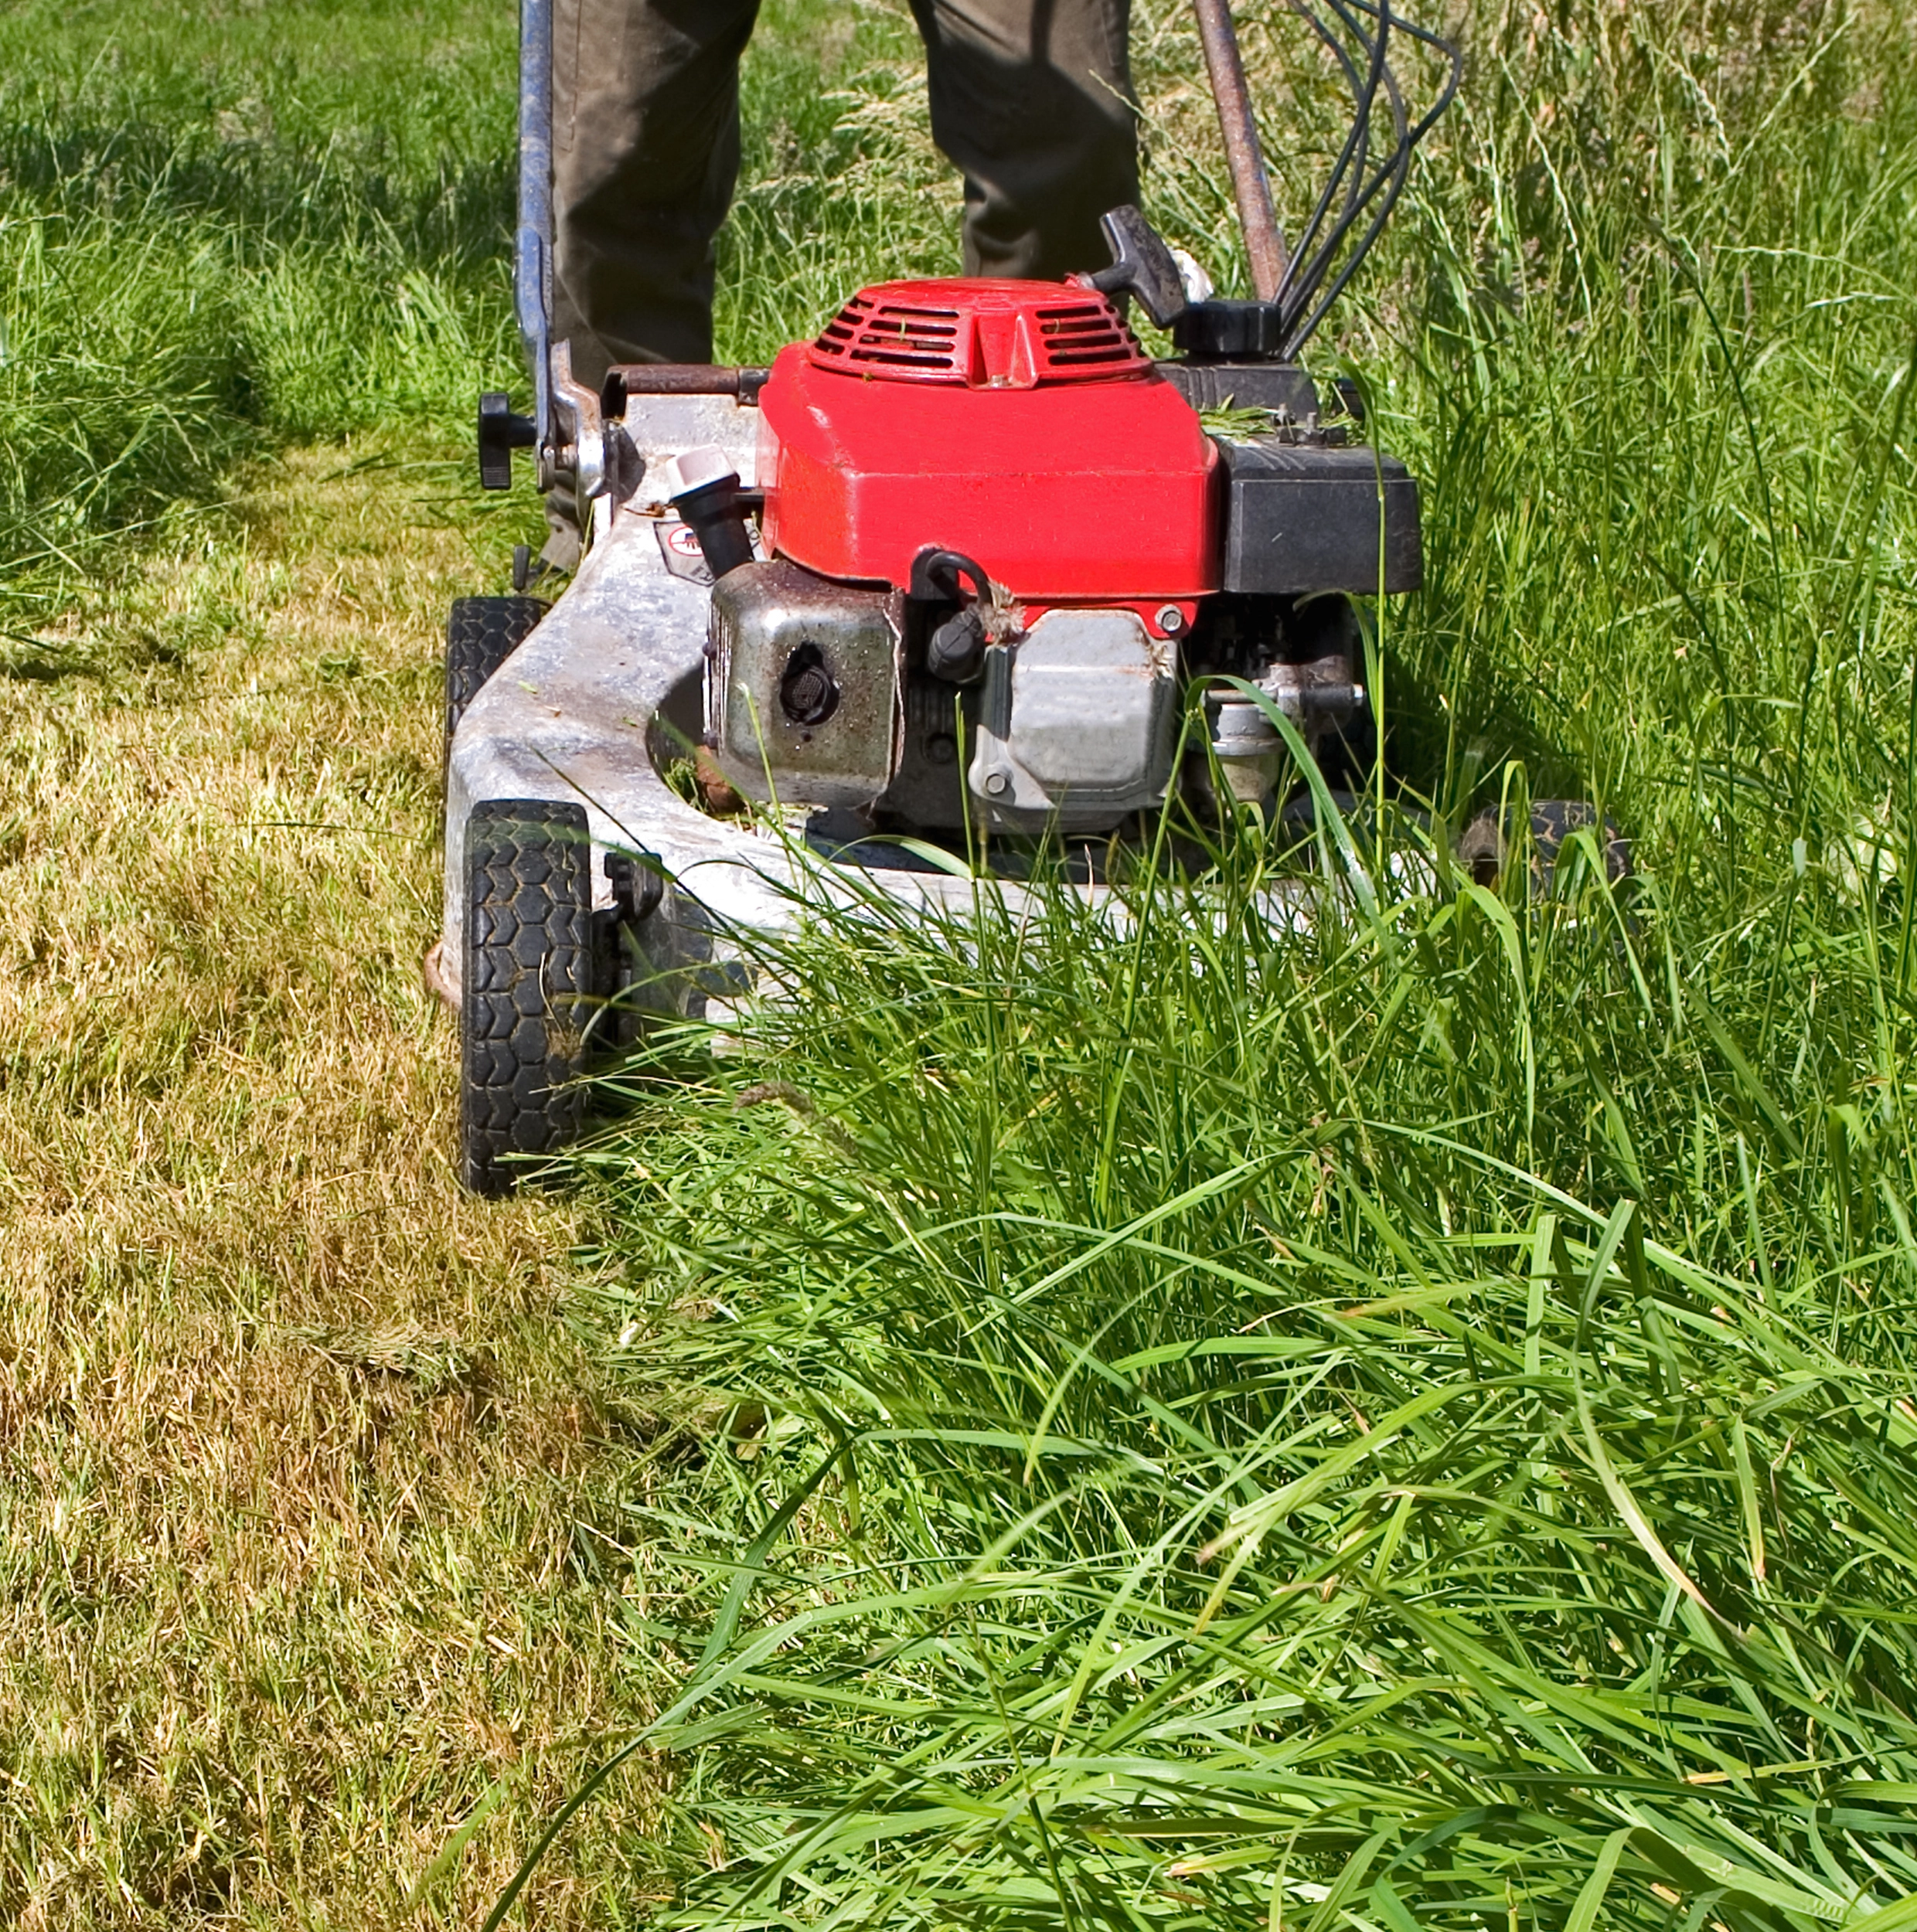 Overgrown Lawn Rescue - One-Time Lawn Service